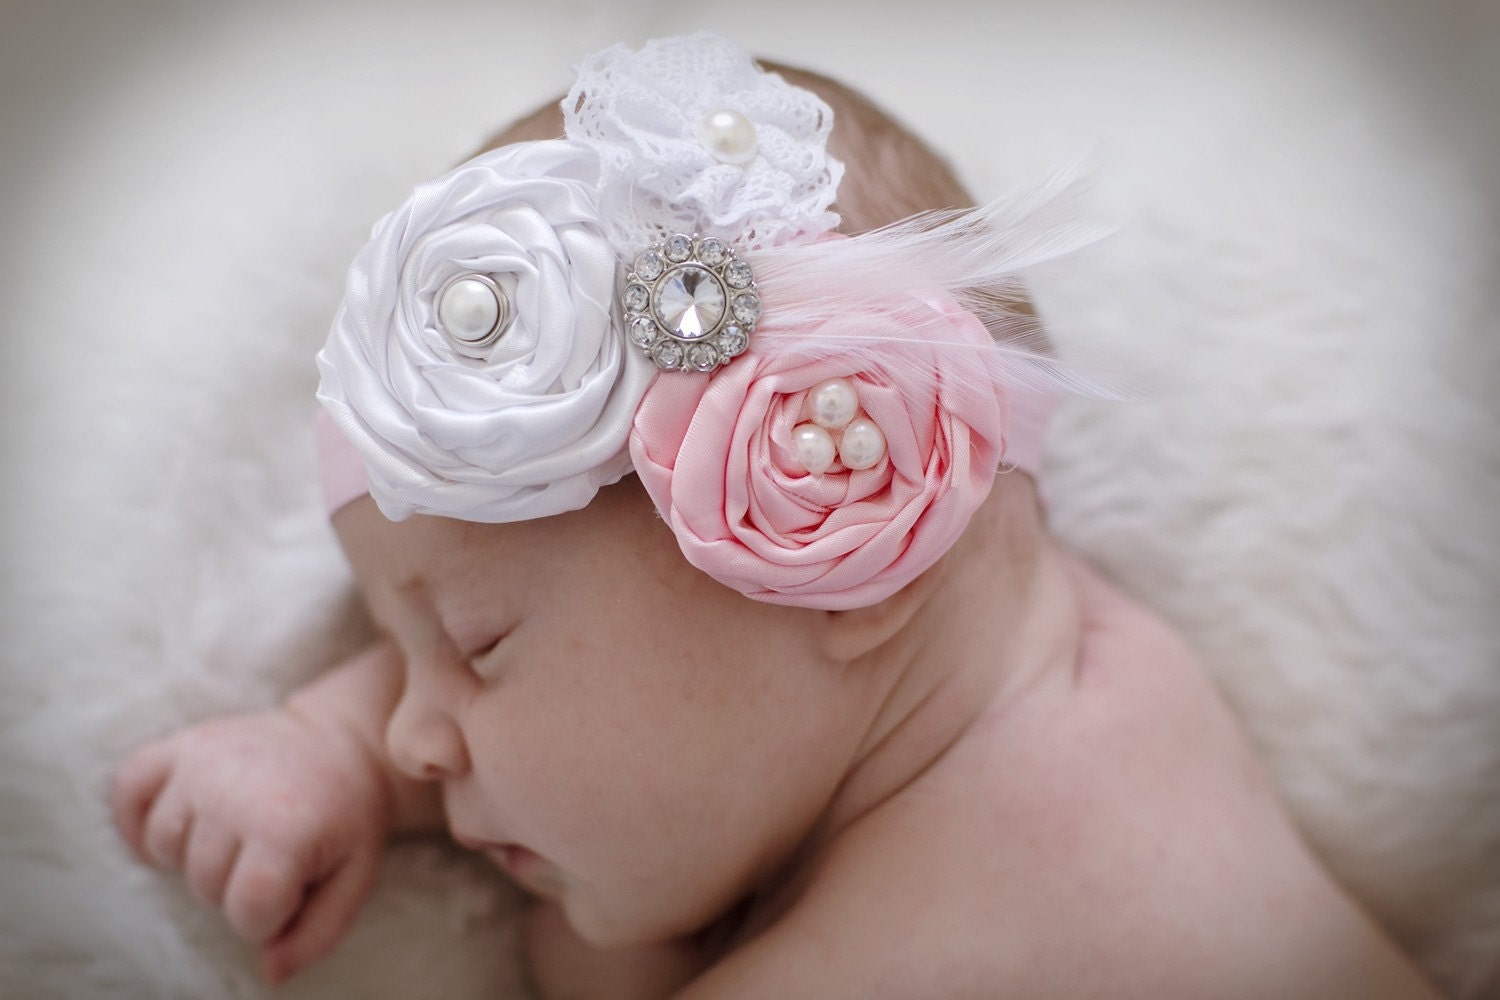 15 New baby headbands with hair 958 Hair bow .The Ella Grace vintage inspired baby by Ellasbows 